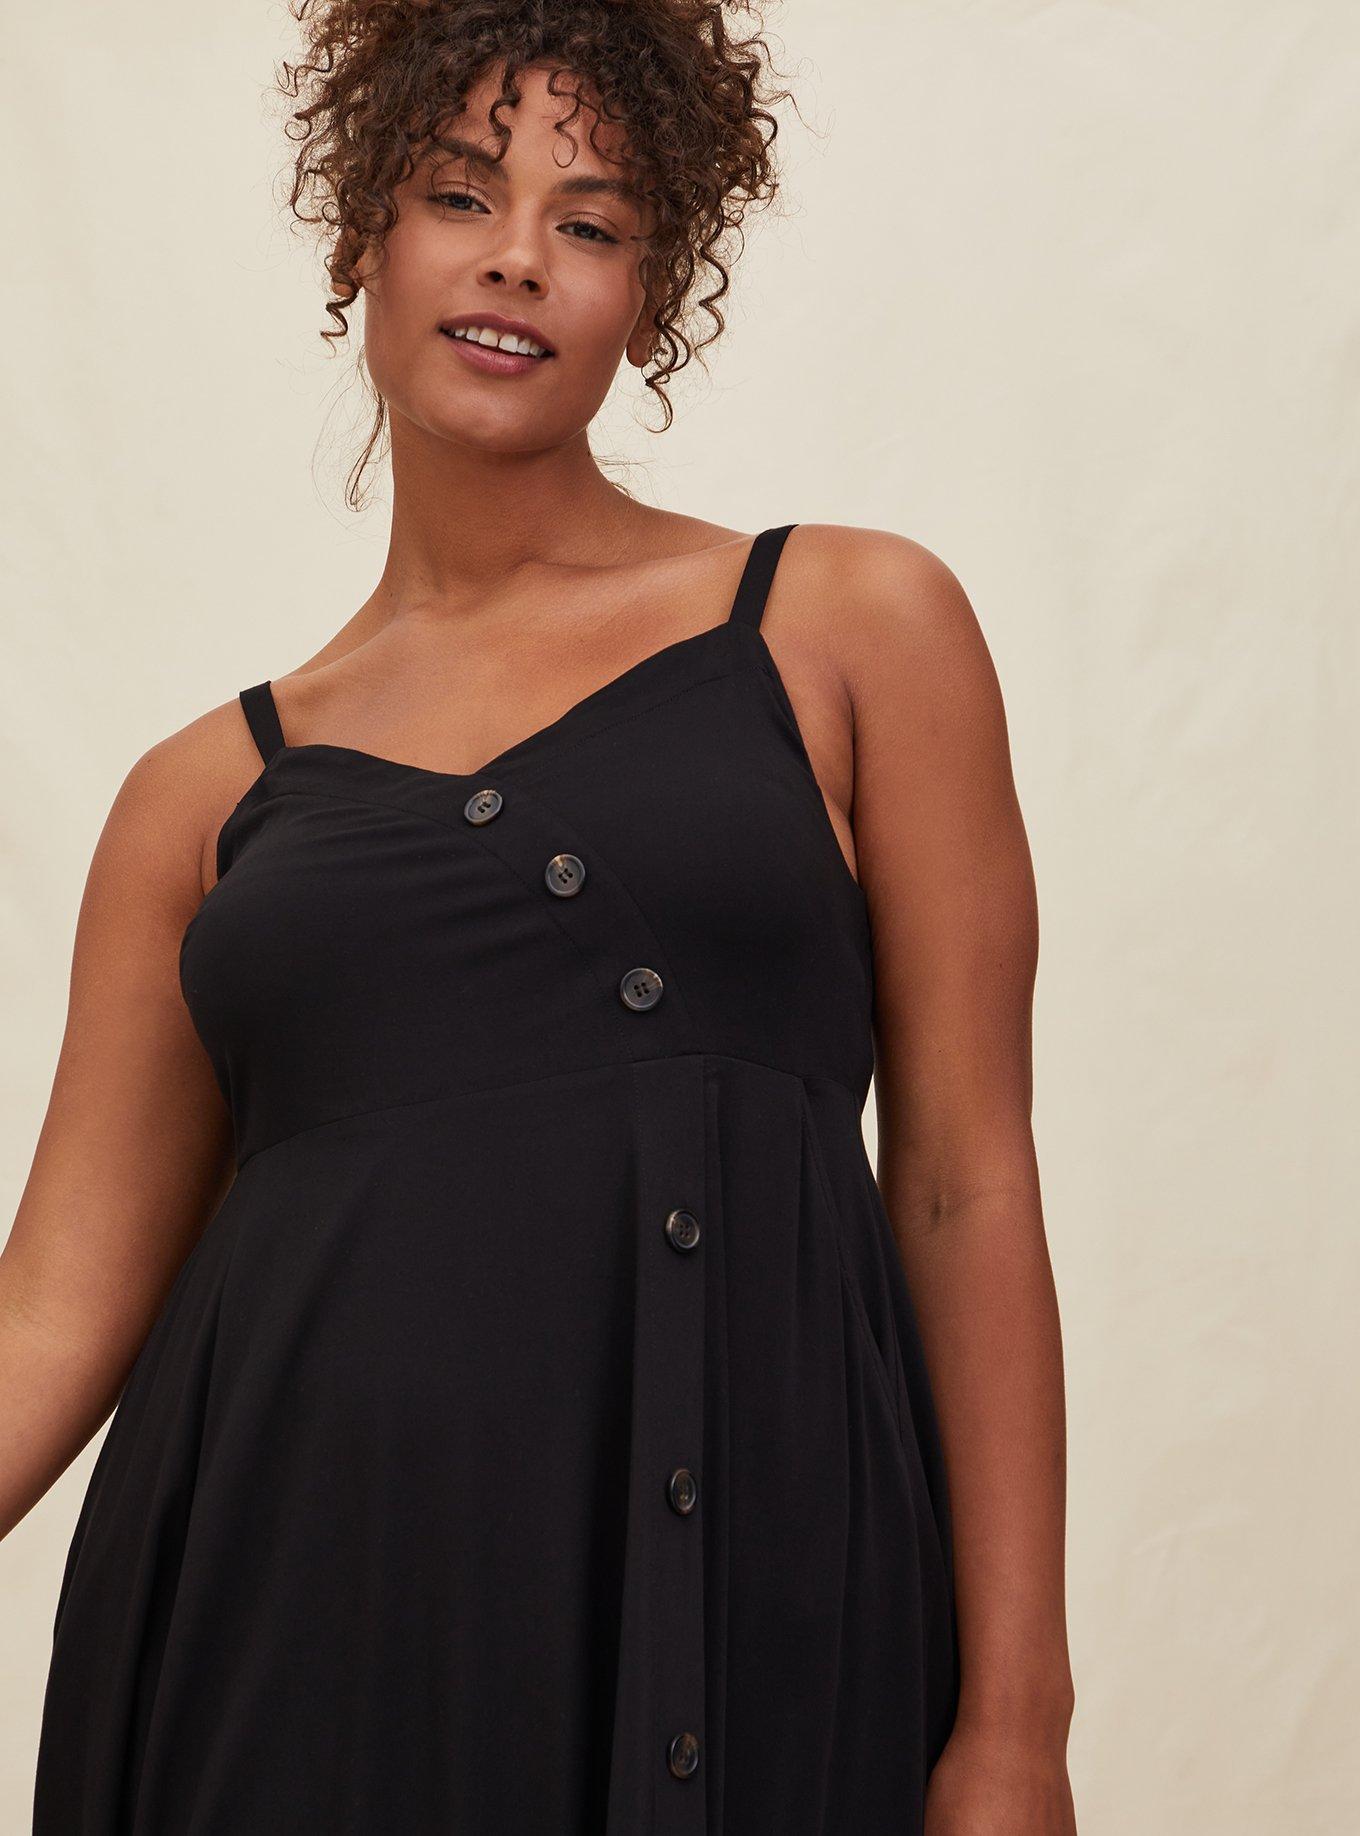 Torrid Plus Size Women's Clothing for sale in Clinton, North